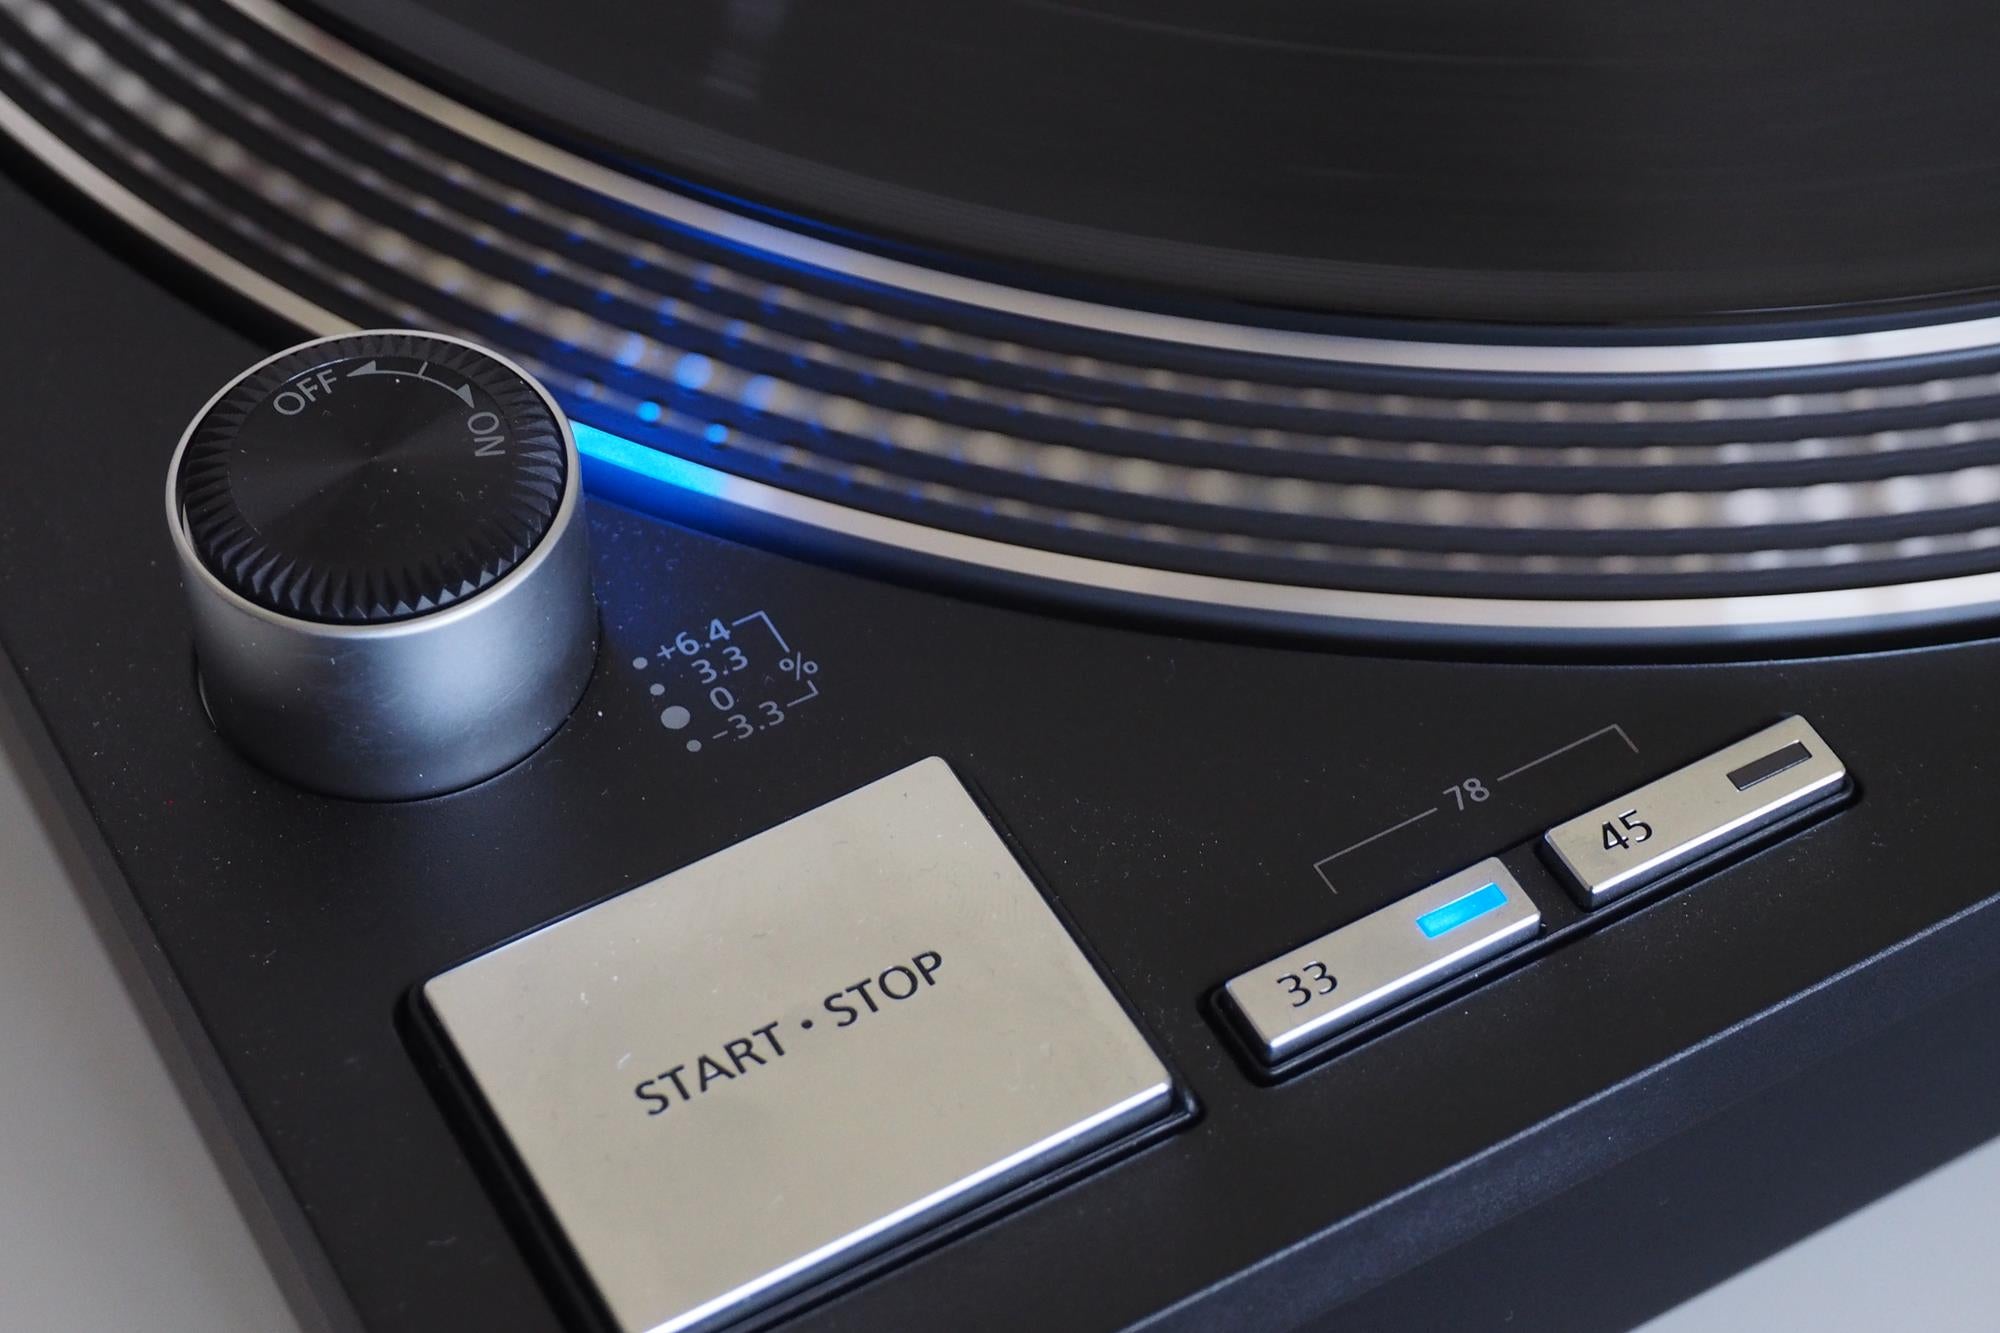 Close-up of Technics turntable pitch control and start/stop button.